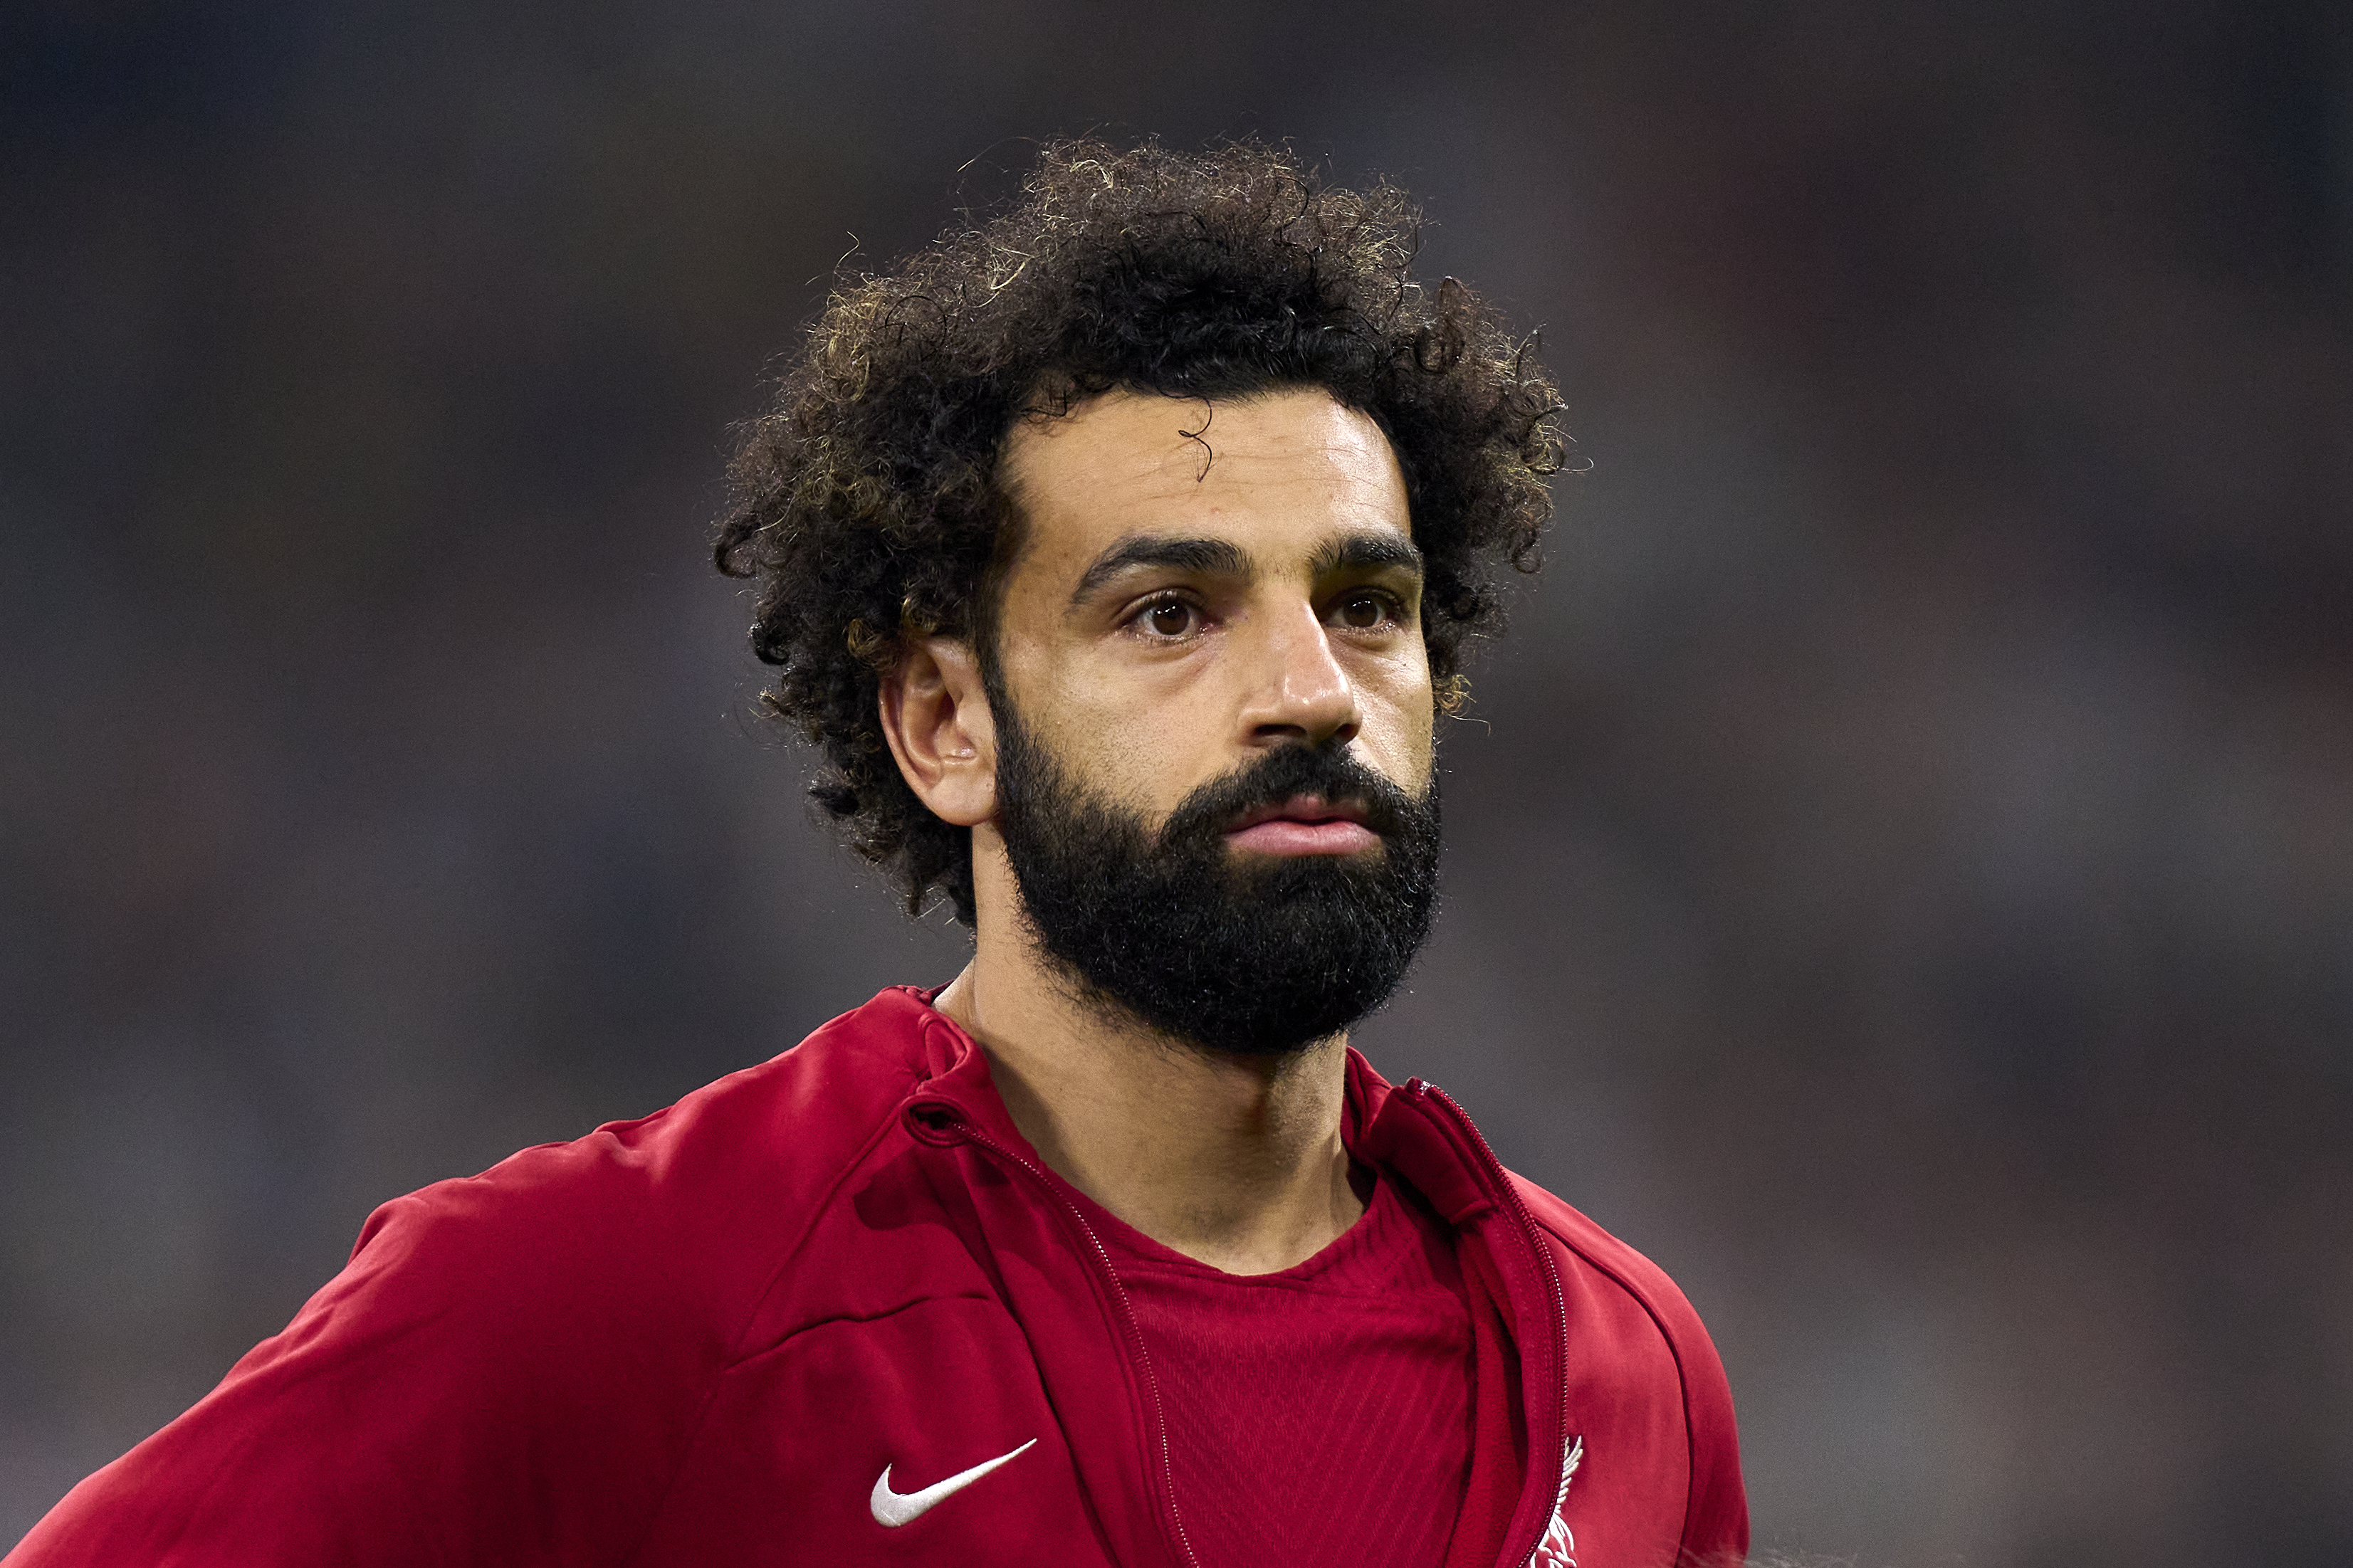 MADRID, SPAIN - MARCH 15: Mohamed Salah of Liverpool FC looks on prior the game during the UEFA Champions League round of 16 leg two match between Real Madrid and Liverpool FC at Estadio Santiago Bernabeu on March 15, 2023 in Madrid, Spain. (Photo by Diego Souto/Quality Sport Images/Getty Images)